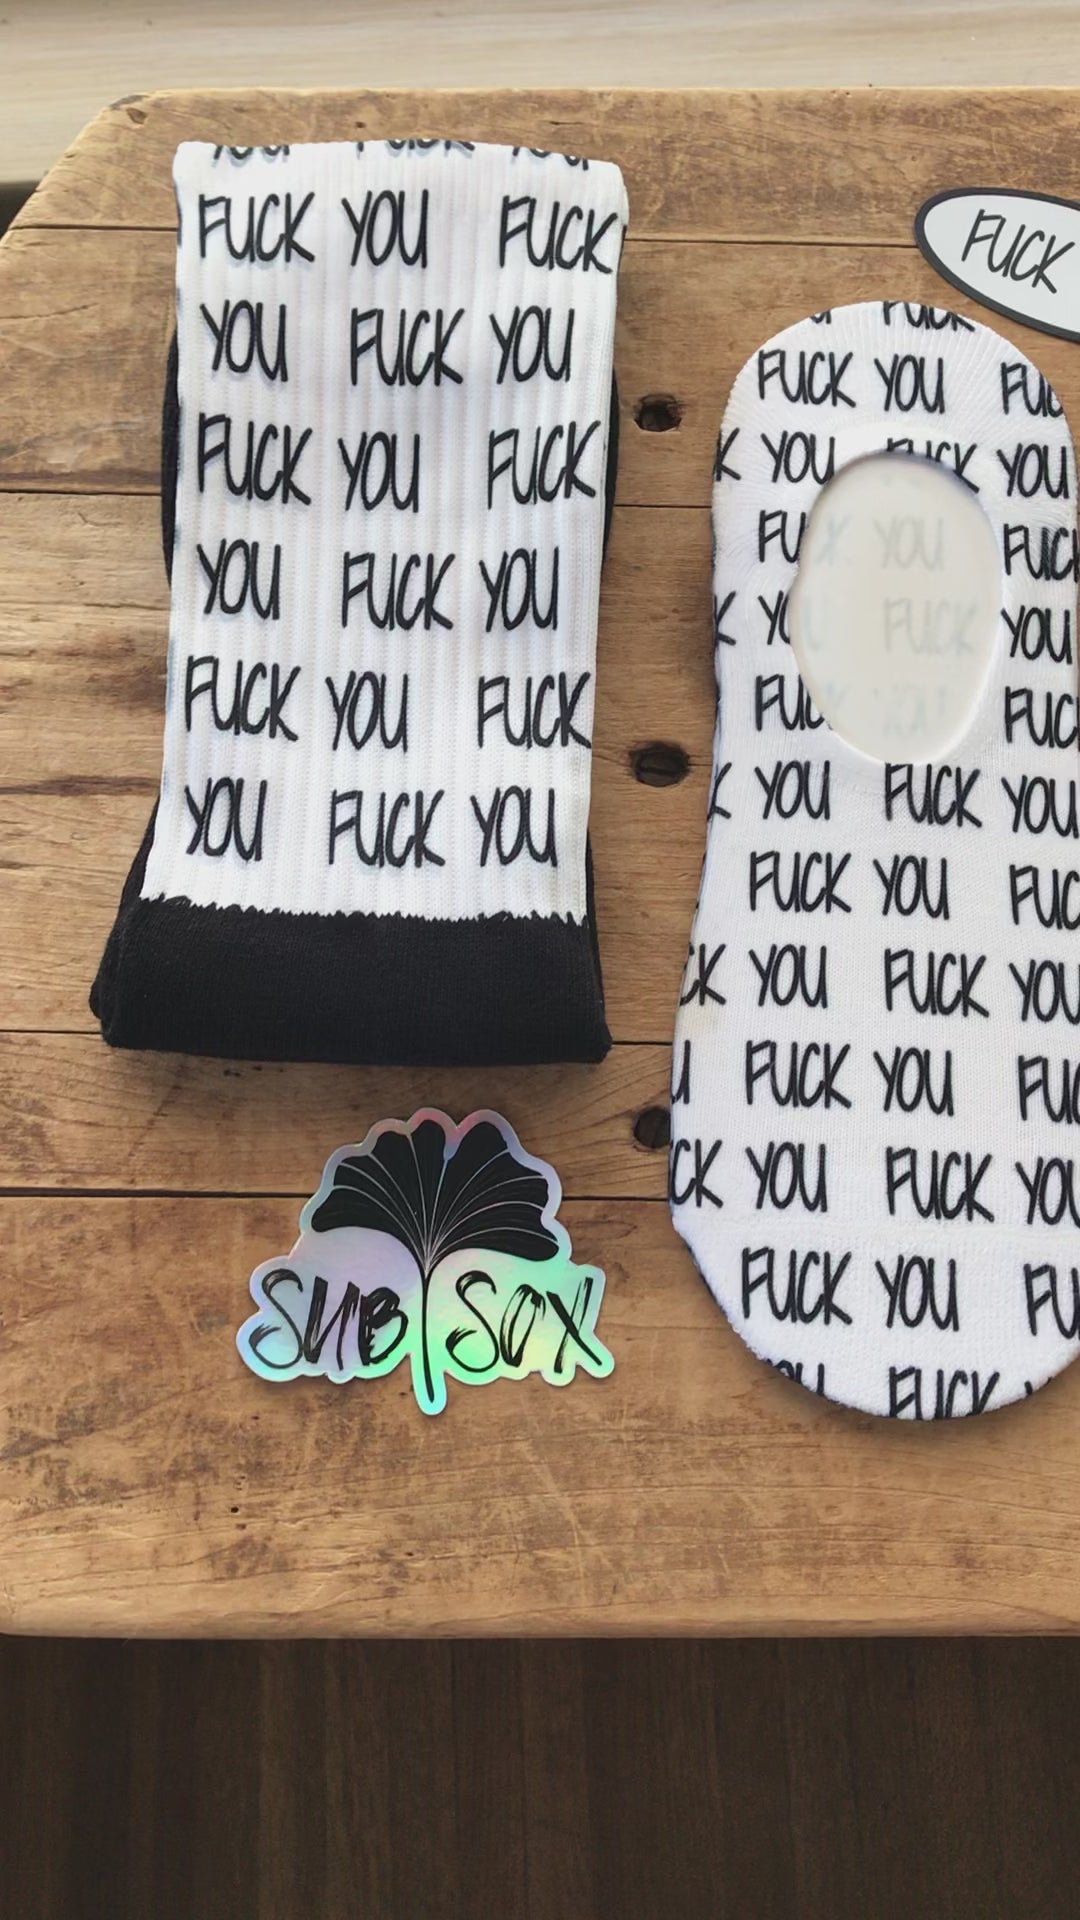 "The Fuck You Gift Box”